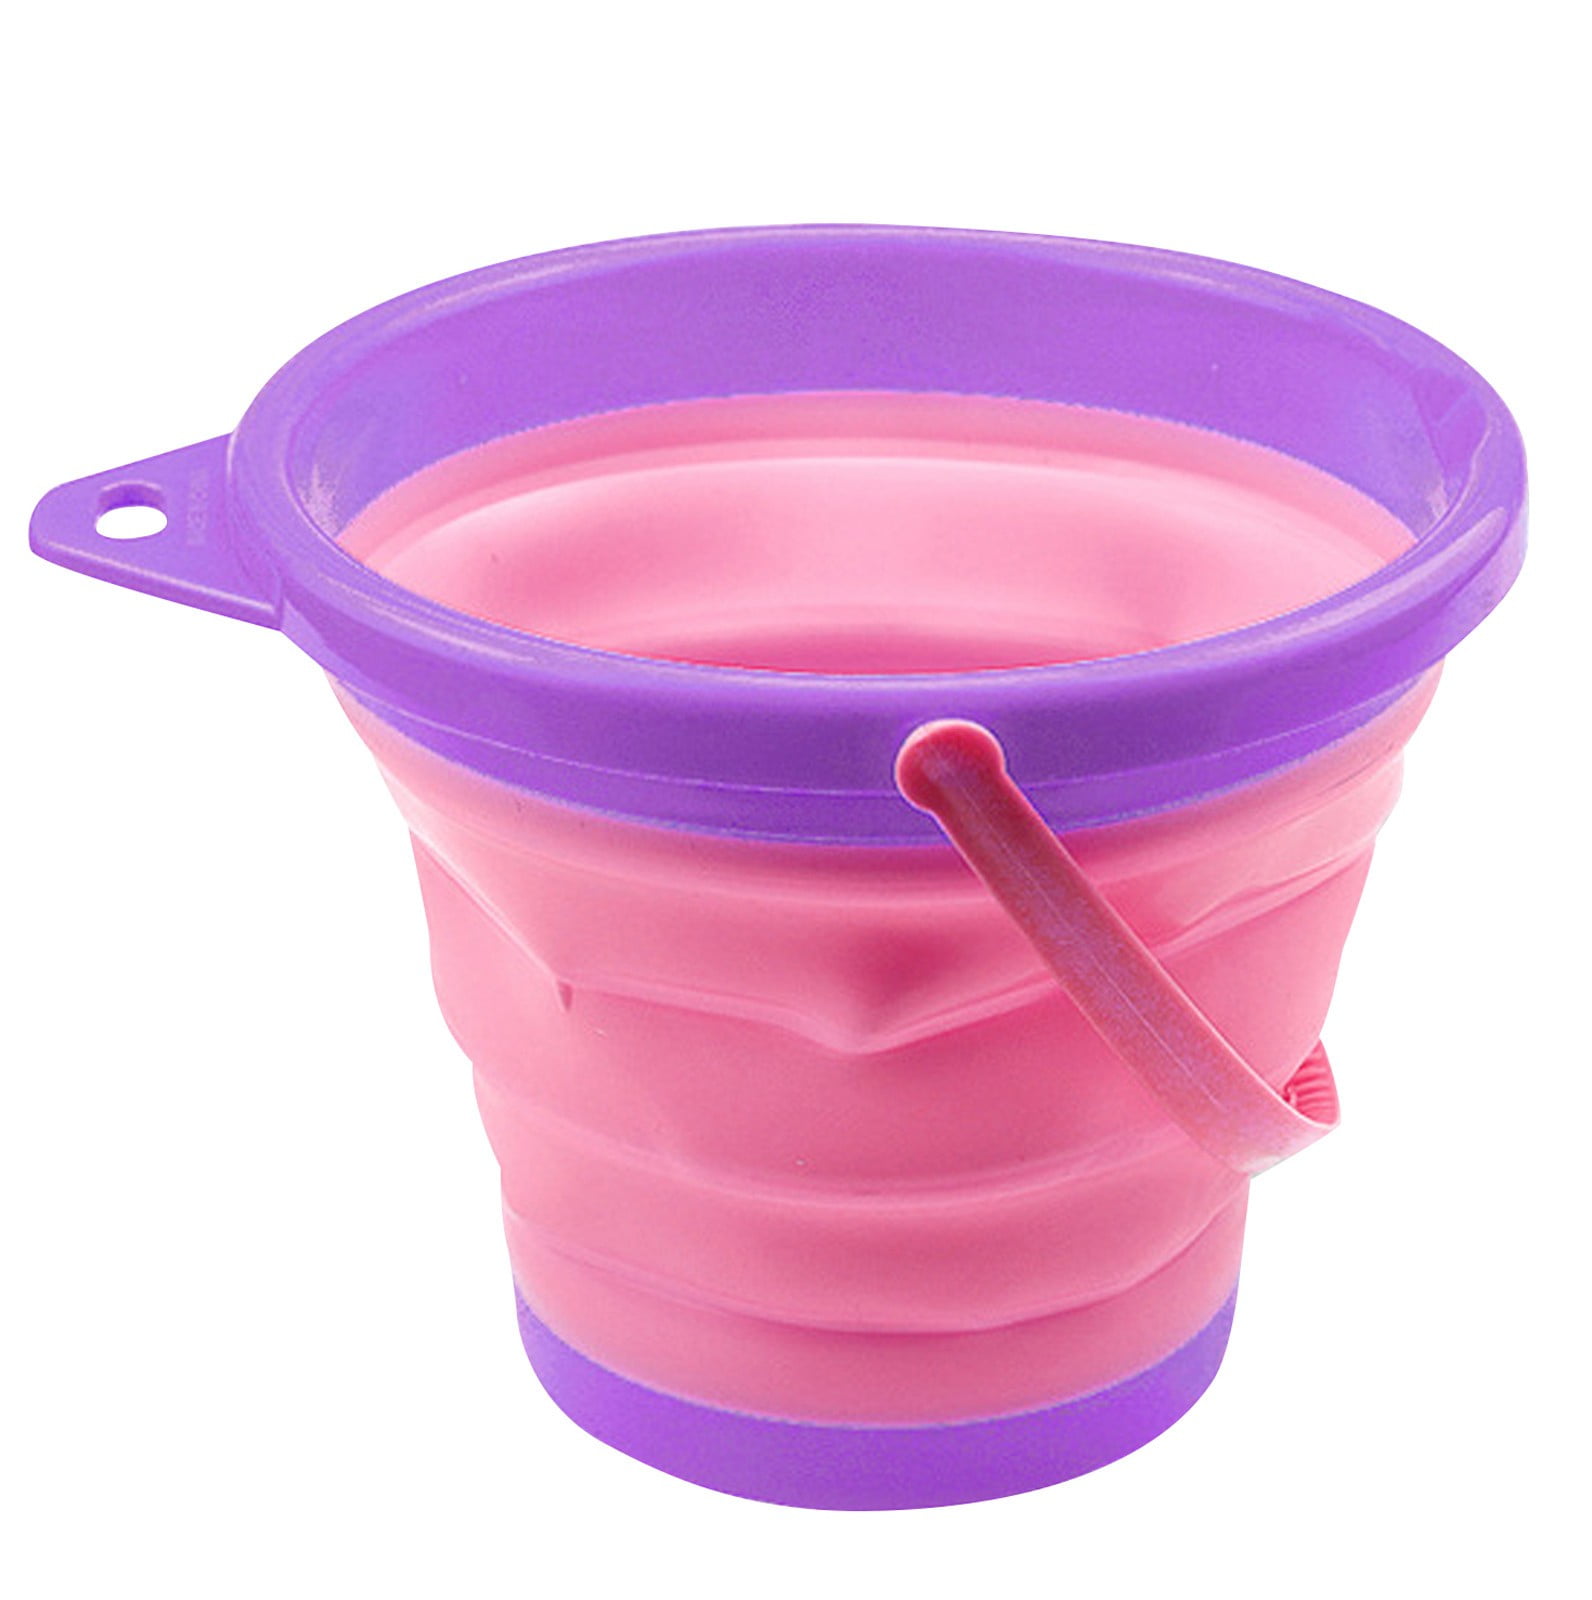 SILICONE BEACH TOYS Collapsible Beach Bucket Shovel Pink Sand WILLOW + SIM